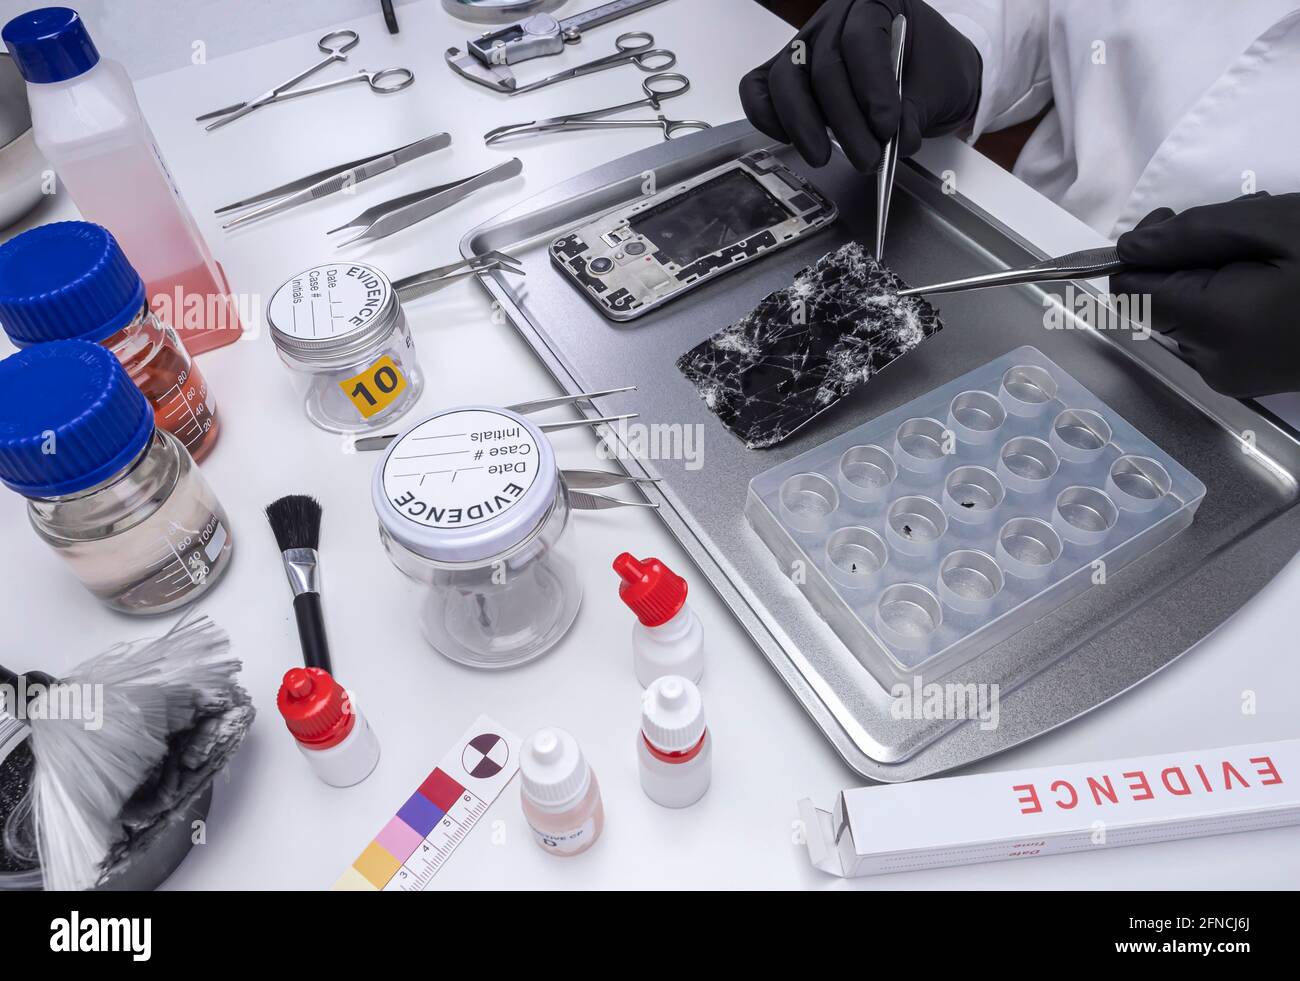 Specialized police investigate smartphone fragments in crime lab, conceptual image Stock Photo